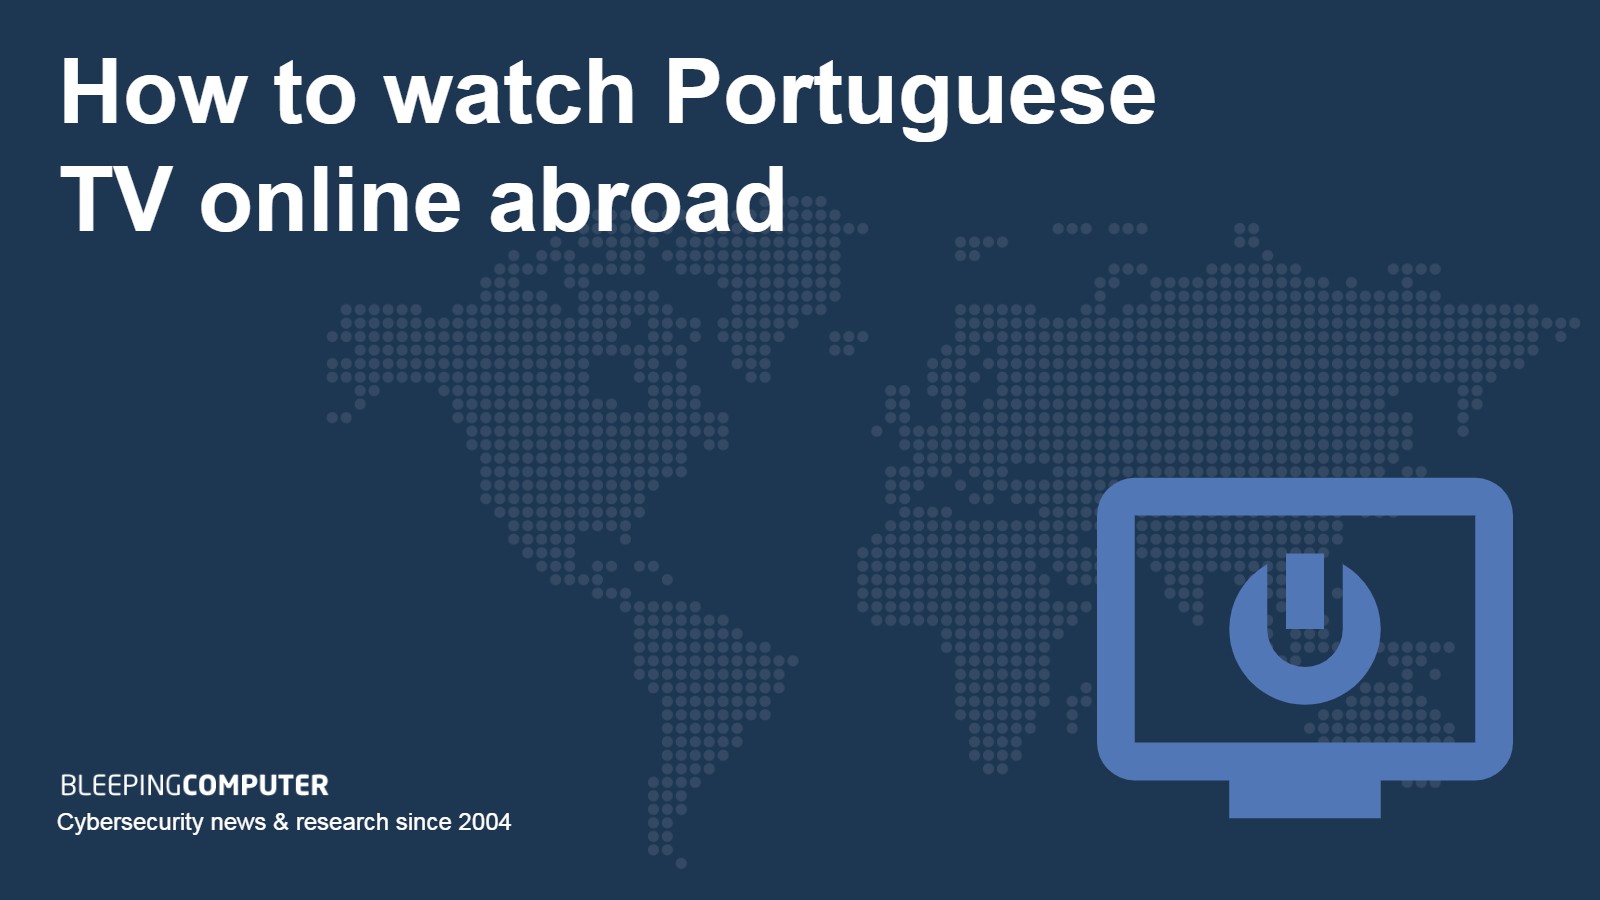 How to watch Portuguese TV online abroad